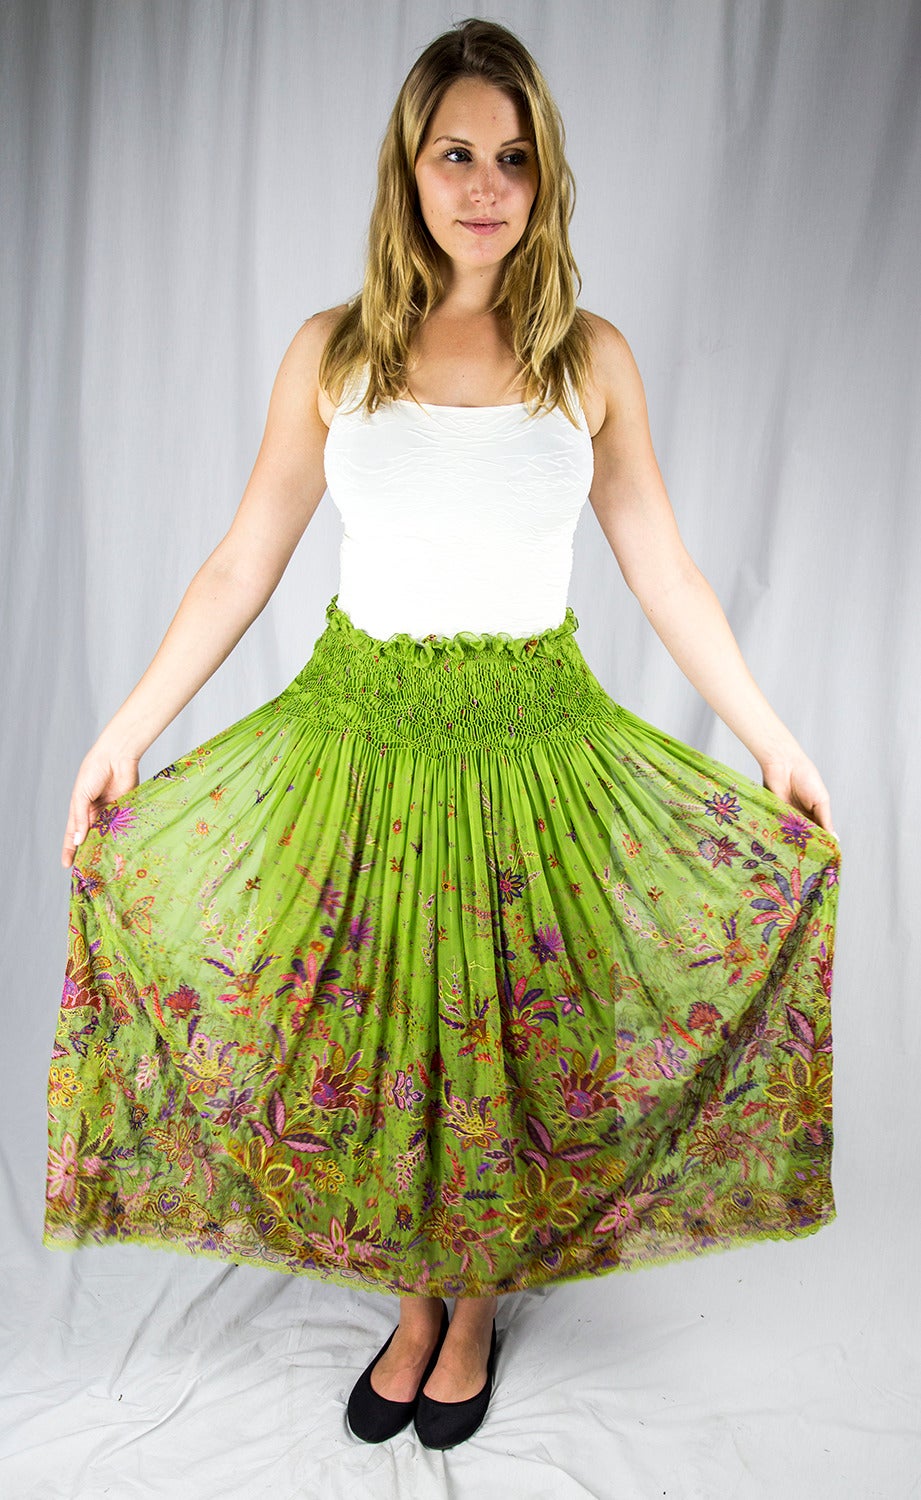 Luxurious All Silk Oscar de la Renta Green Embroidered Floral Pleated Long Silk...Beautifully pleated front and back...5” elasticized  waist with side zipper closure and bar hook at the waist; fully satin lined. Go anywhere in style with this Chic